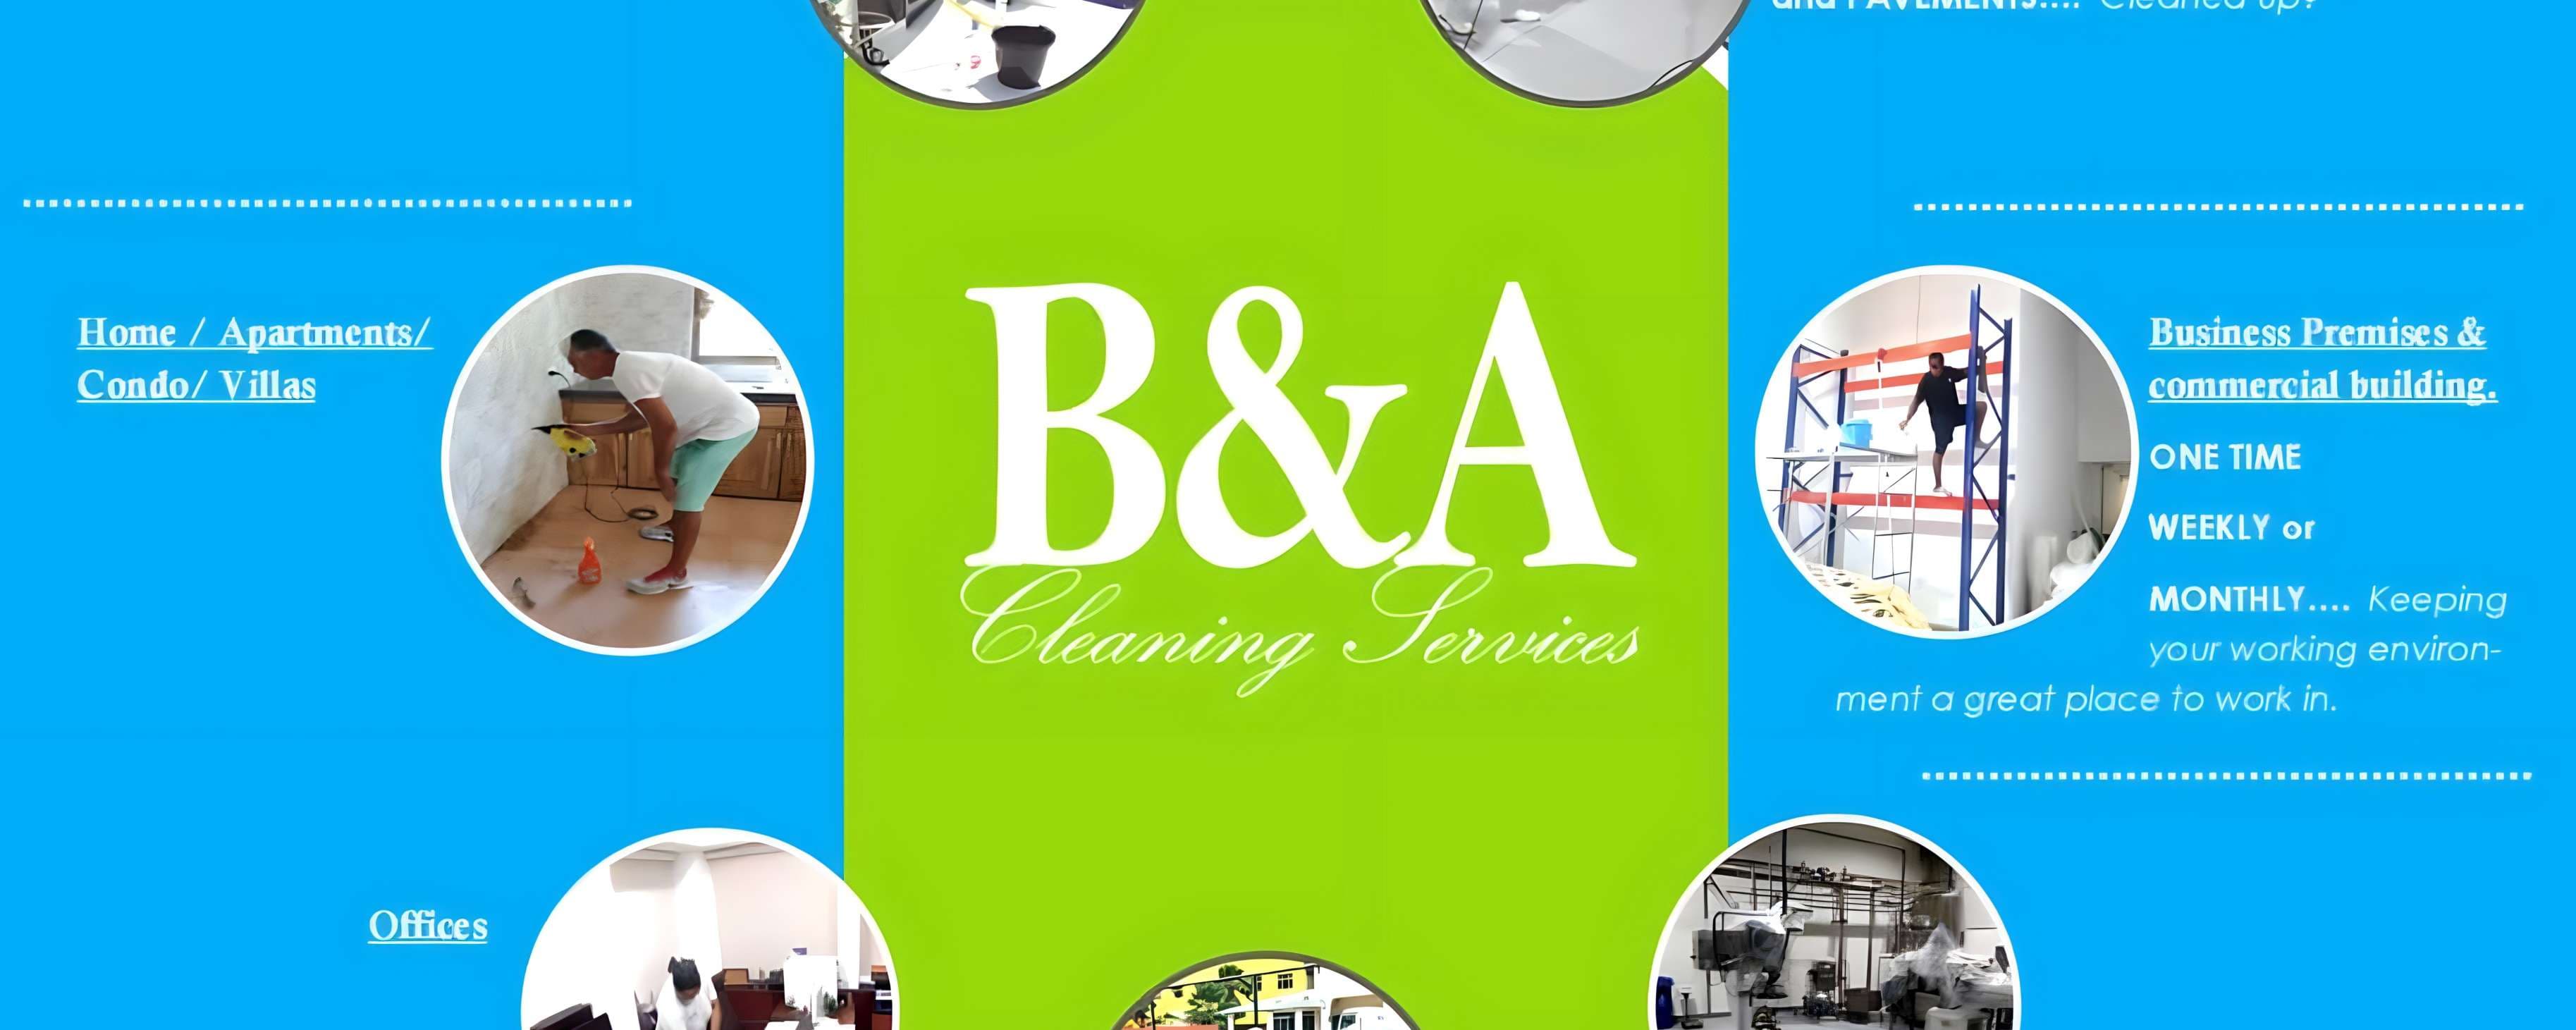 B & A Cleaning Services